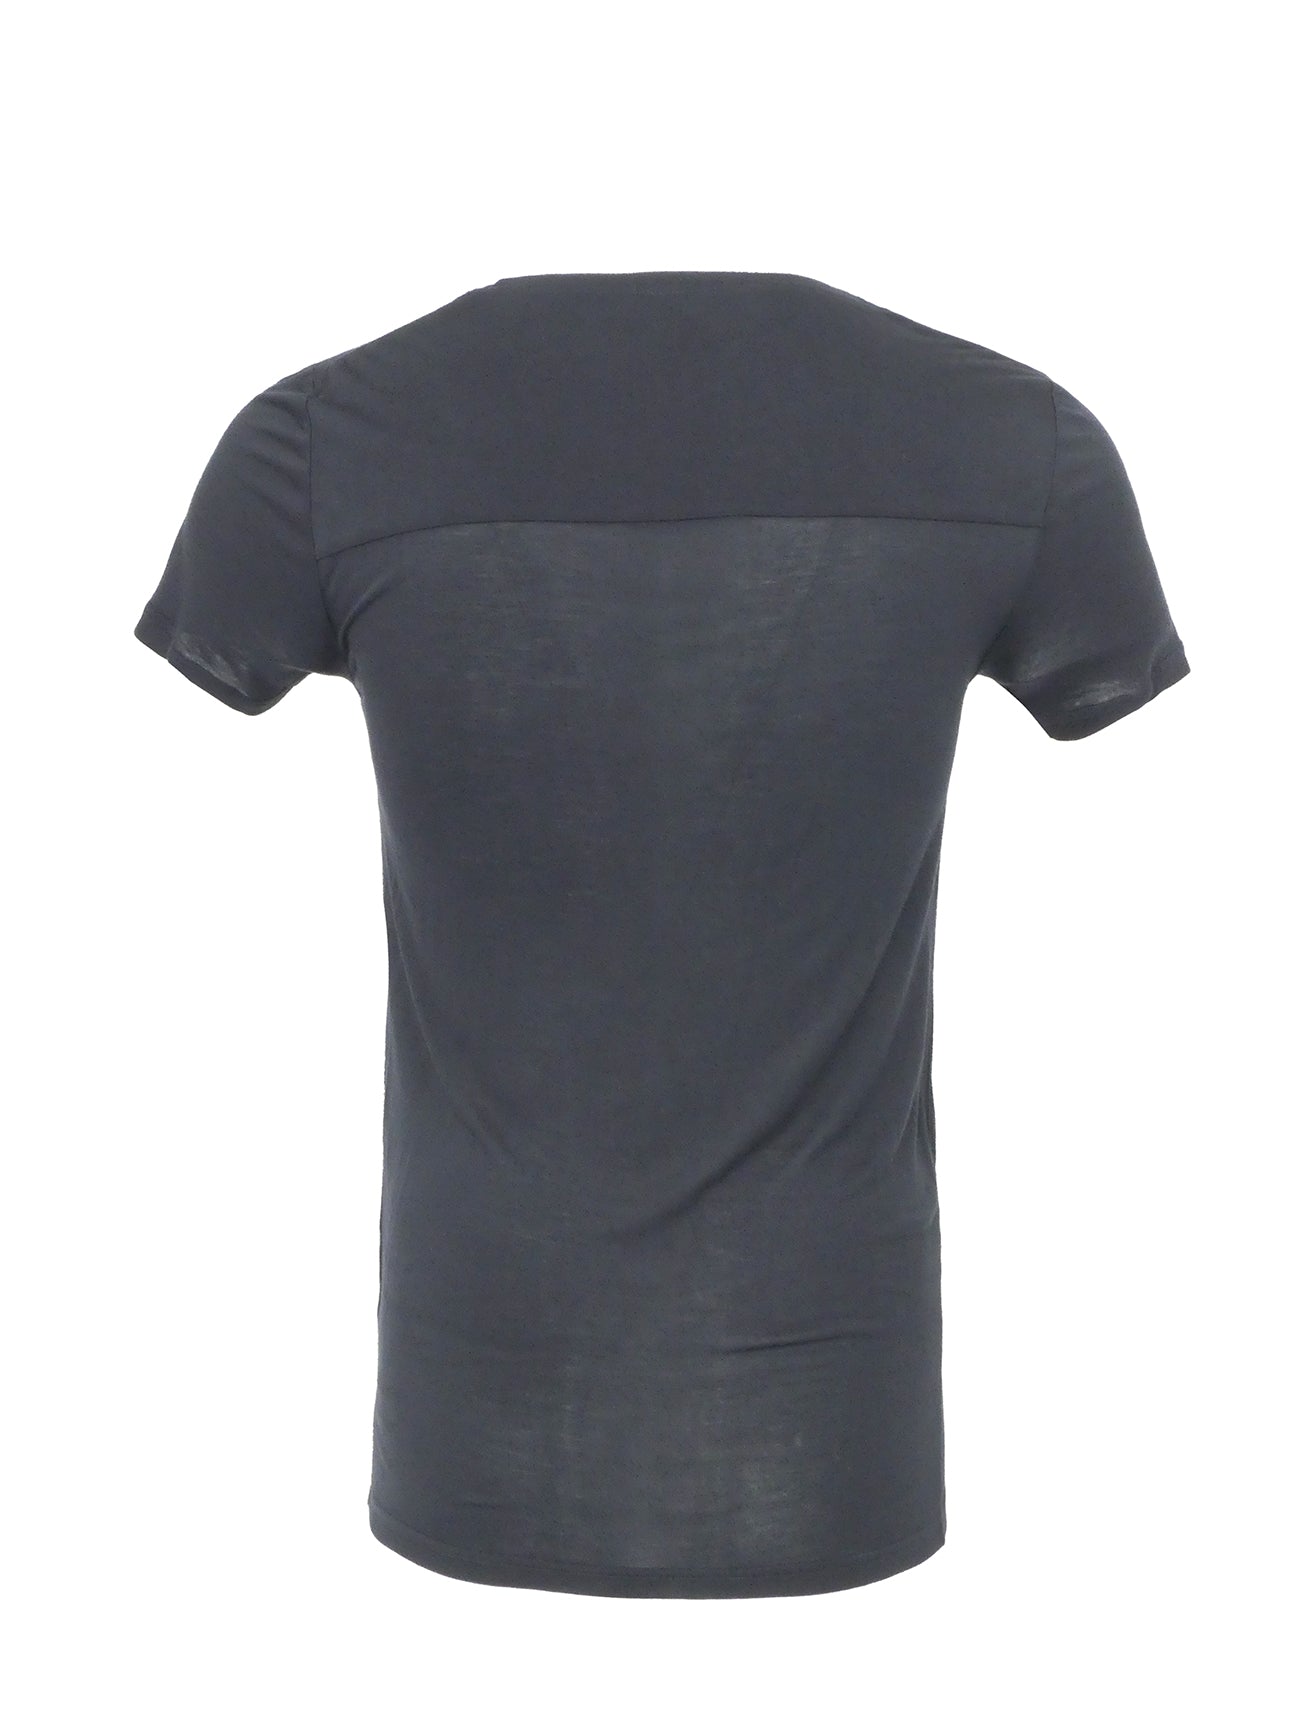 Navy Blue Rayon T-Shirt with Low Cut Neck